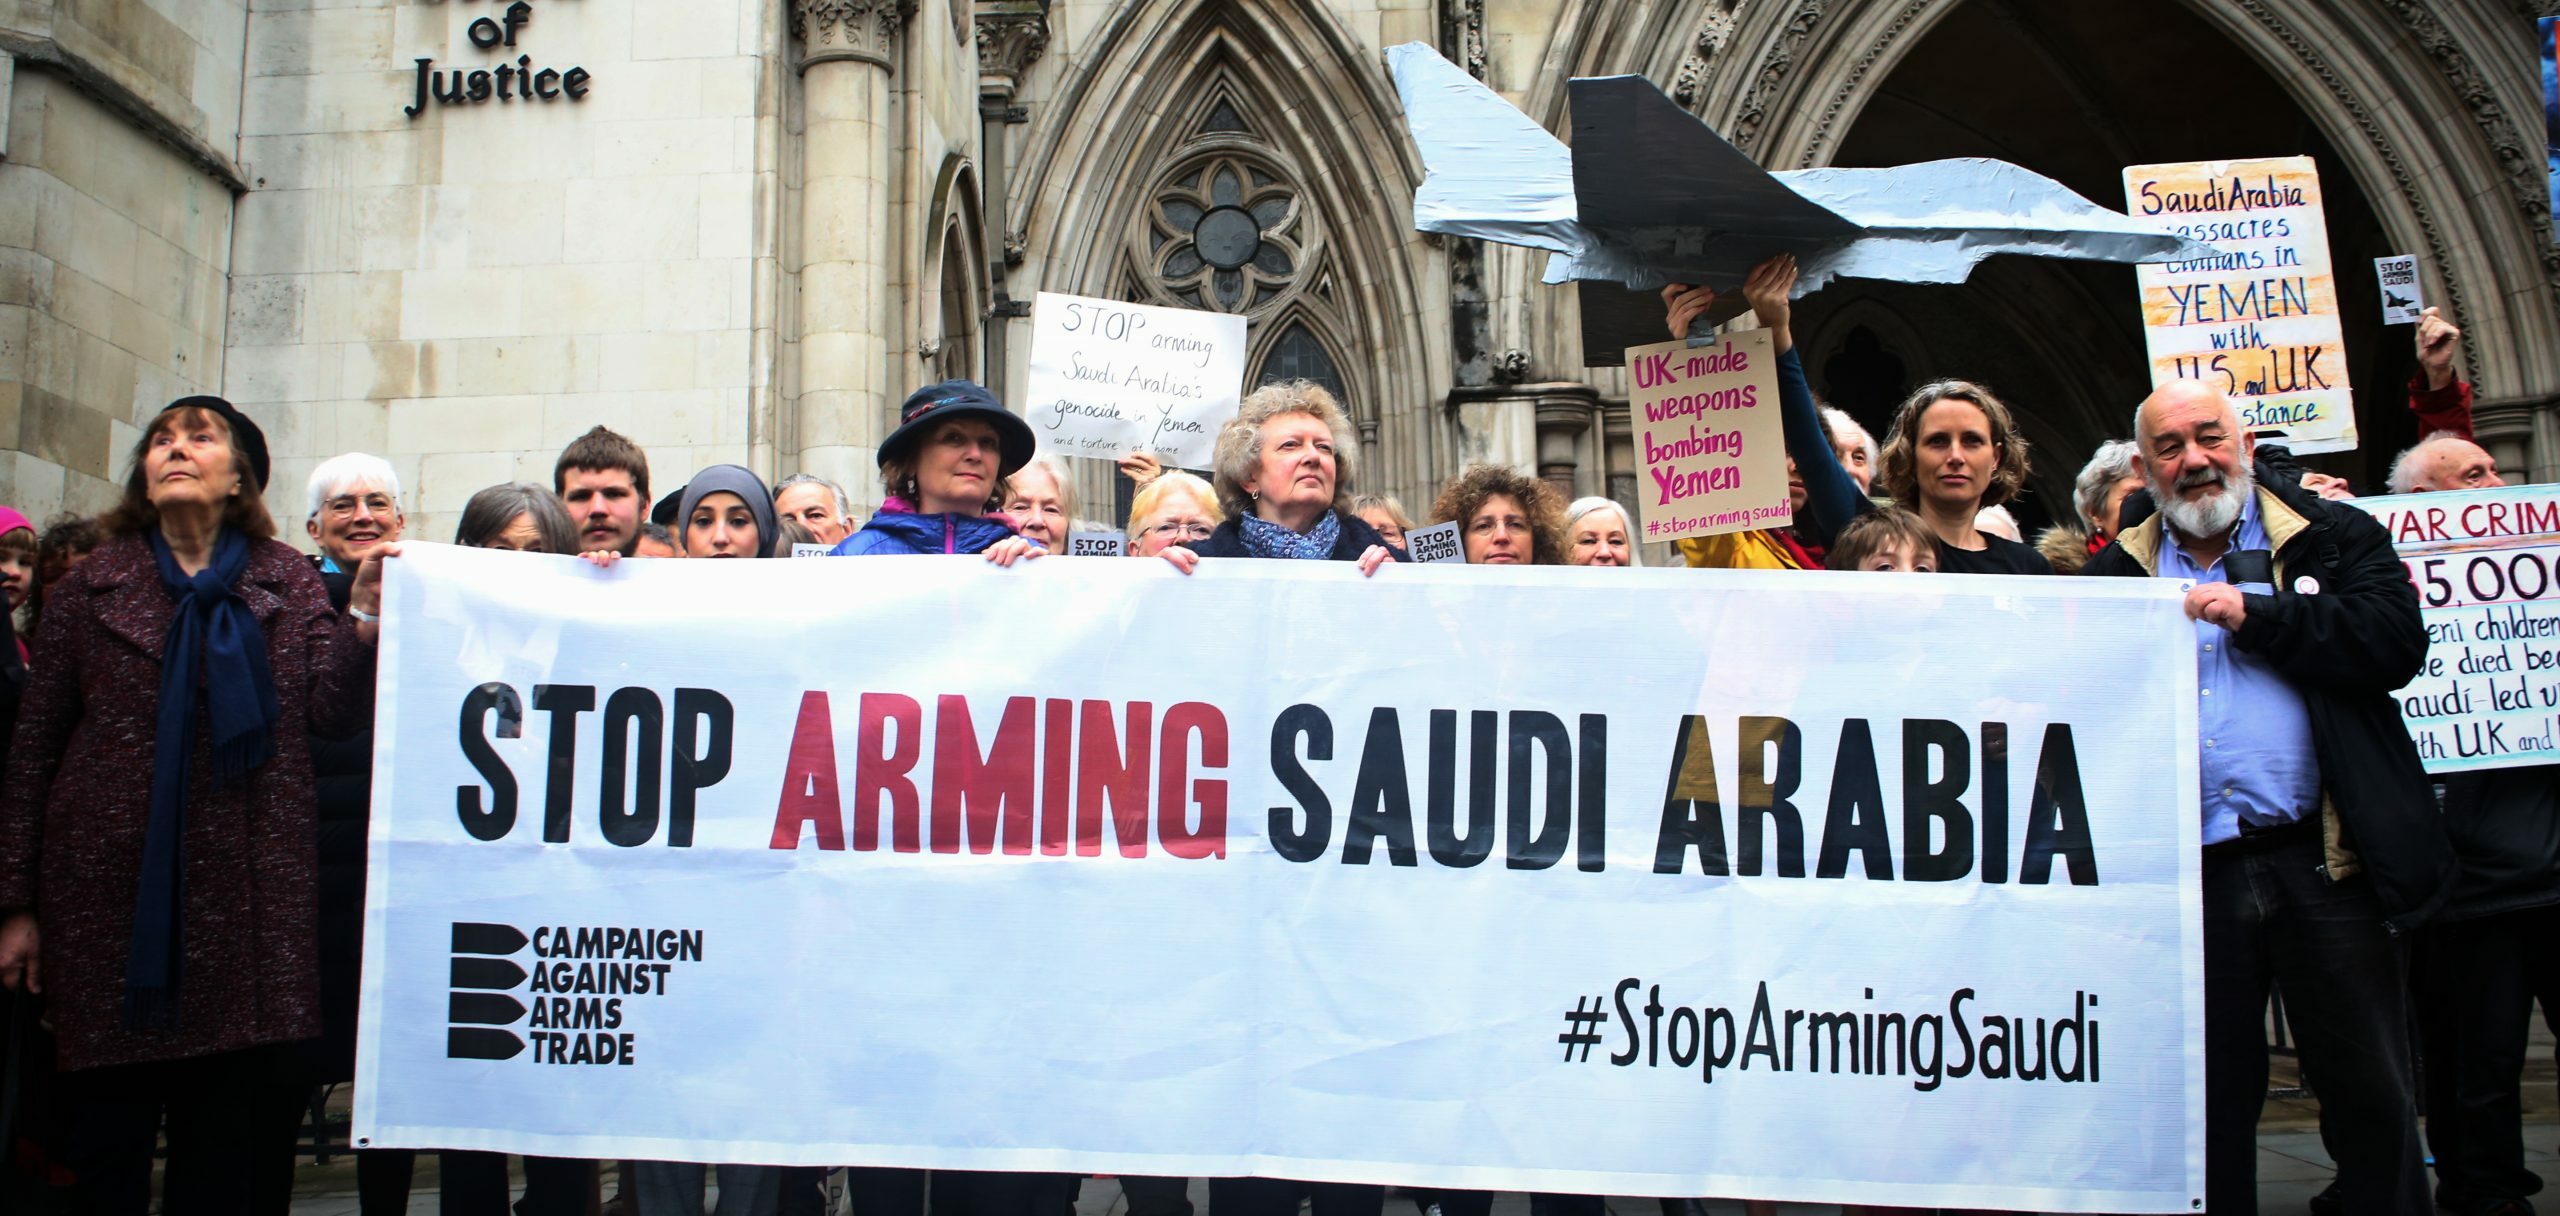 Supporters stand outside the Royal Courts of Justice, behind a banner saying Stop Arming Saudi Arabia, holding handmade placards with statistics about the war in Yemen